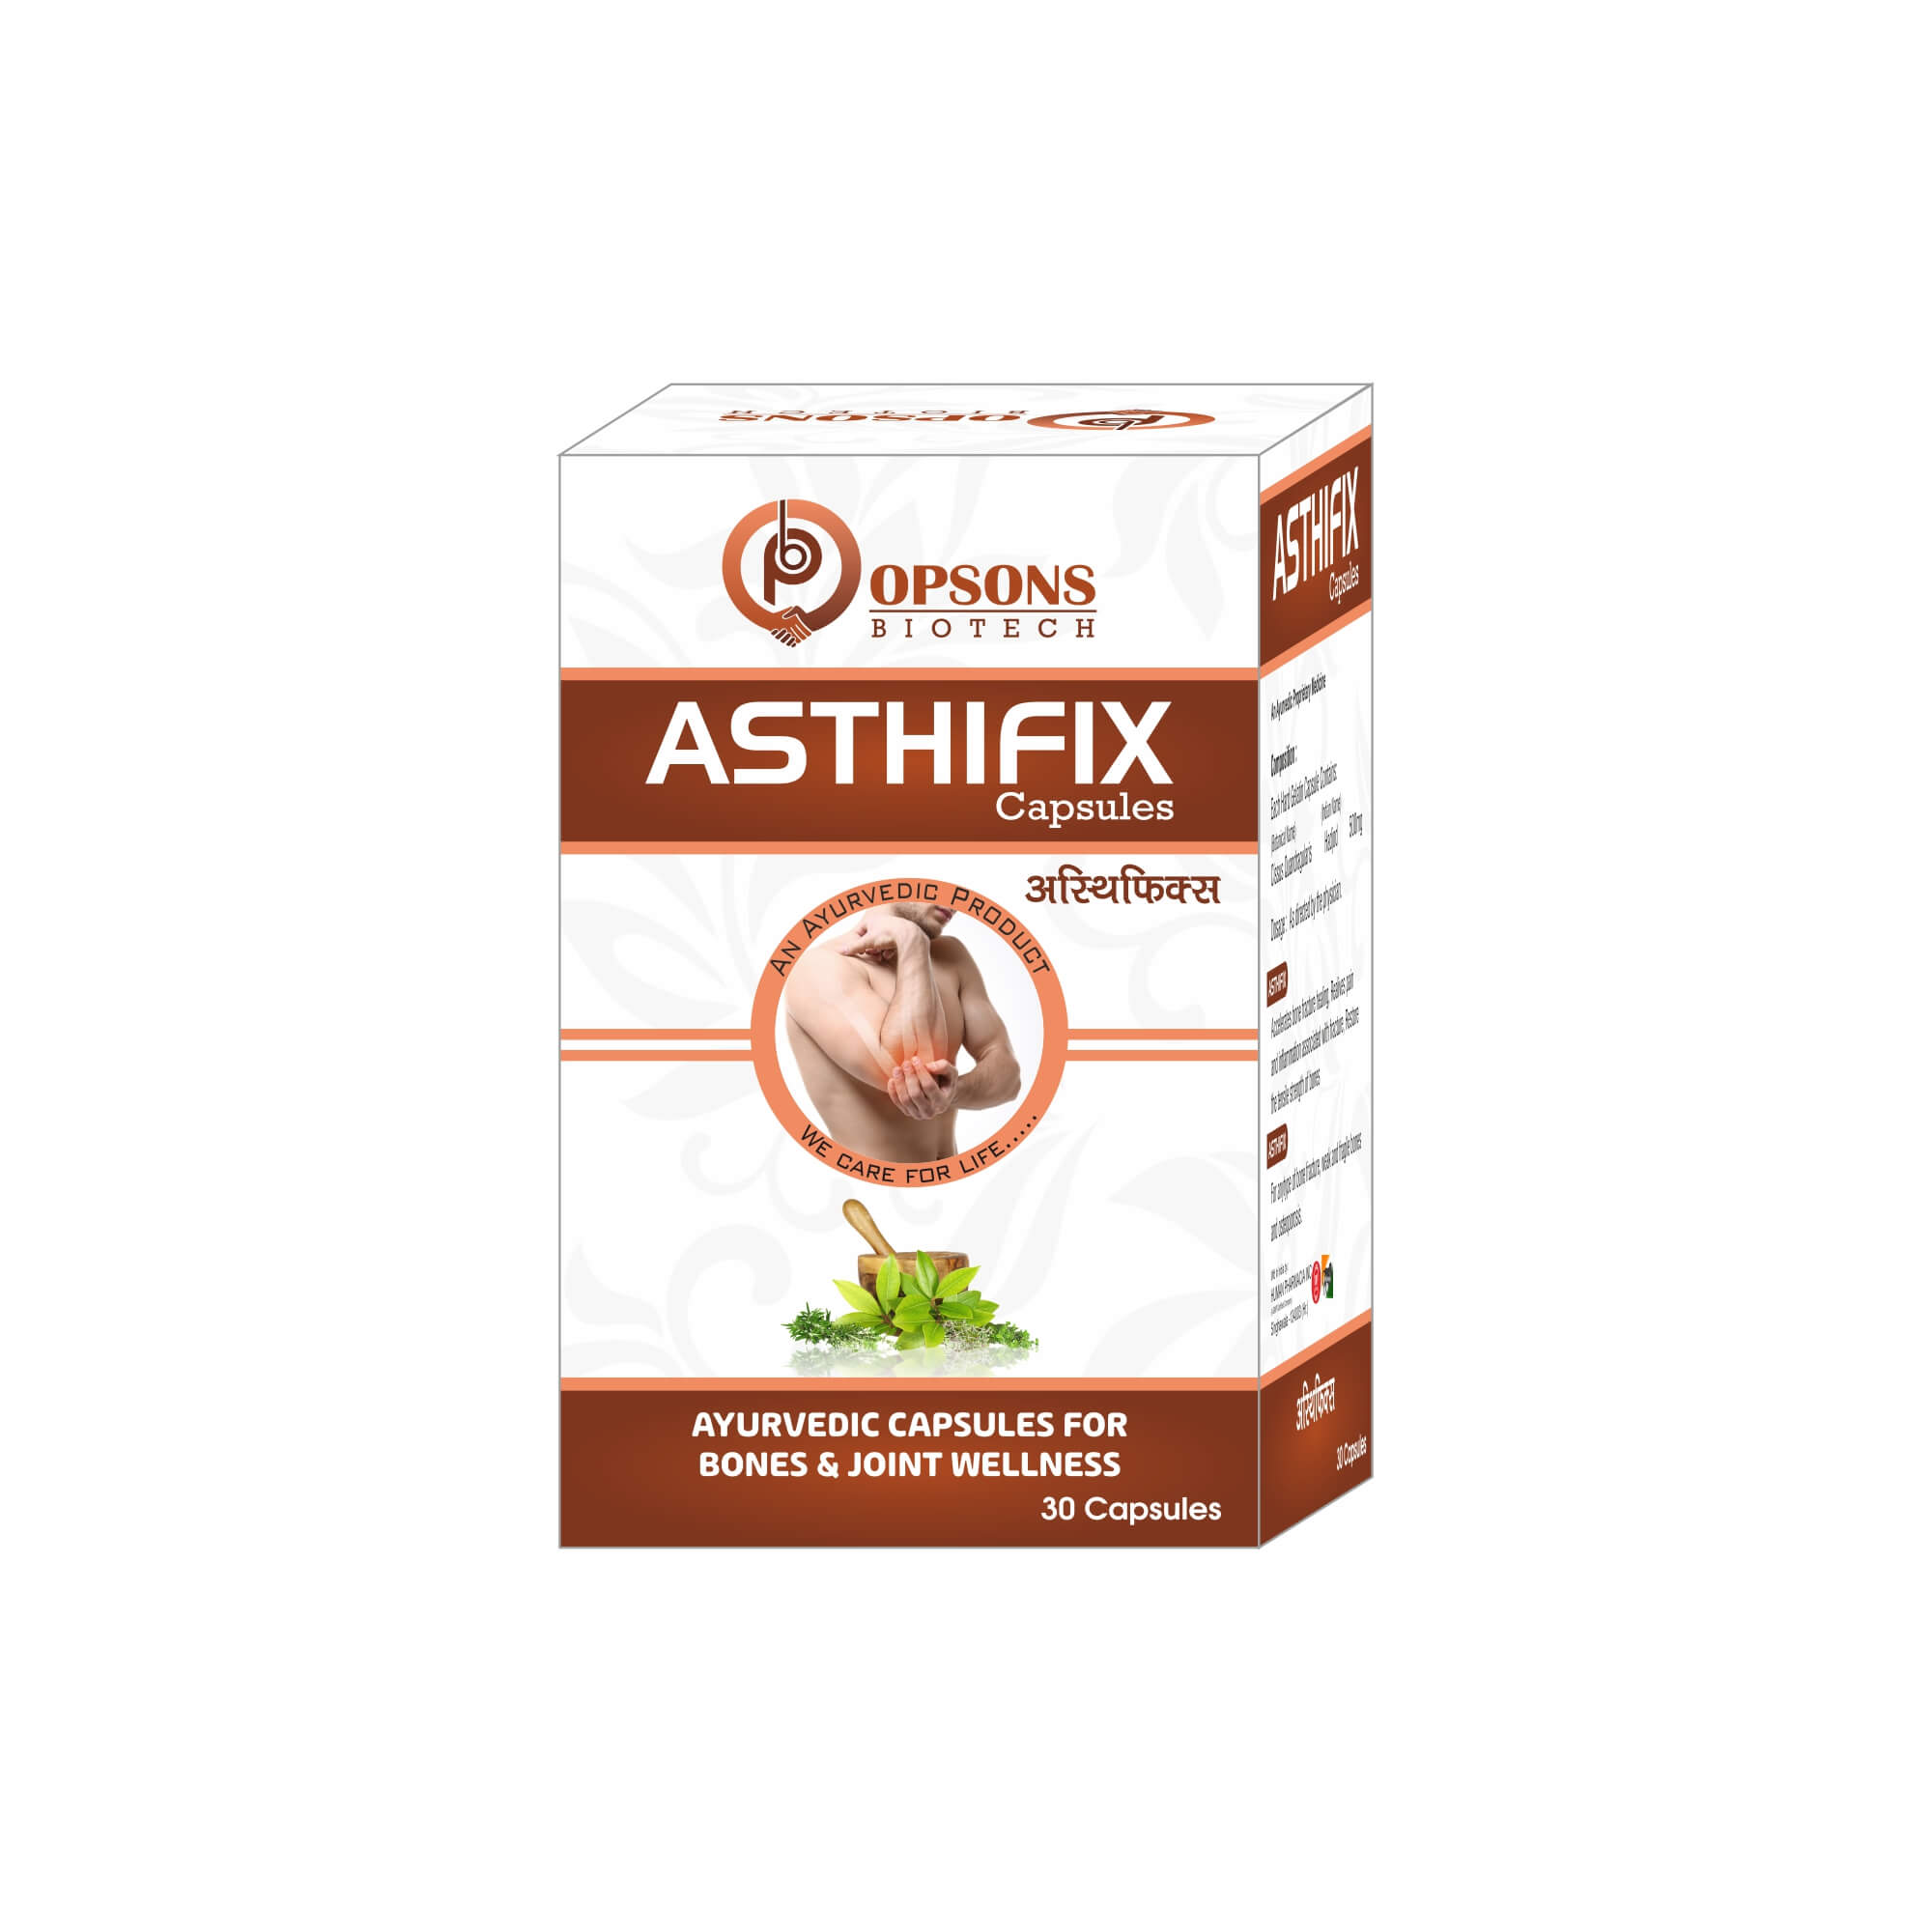 Product Name: Asthifix Caspsules, Compositions of Ayurvedic Capsules For Bones Joint Wellness are Ayurvedic Capsules For Bones Joint Wellness - Opsons Biotech